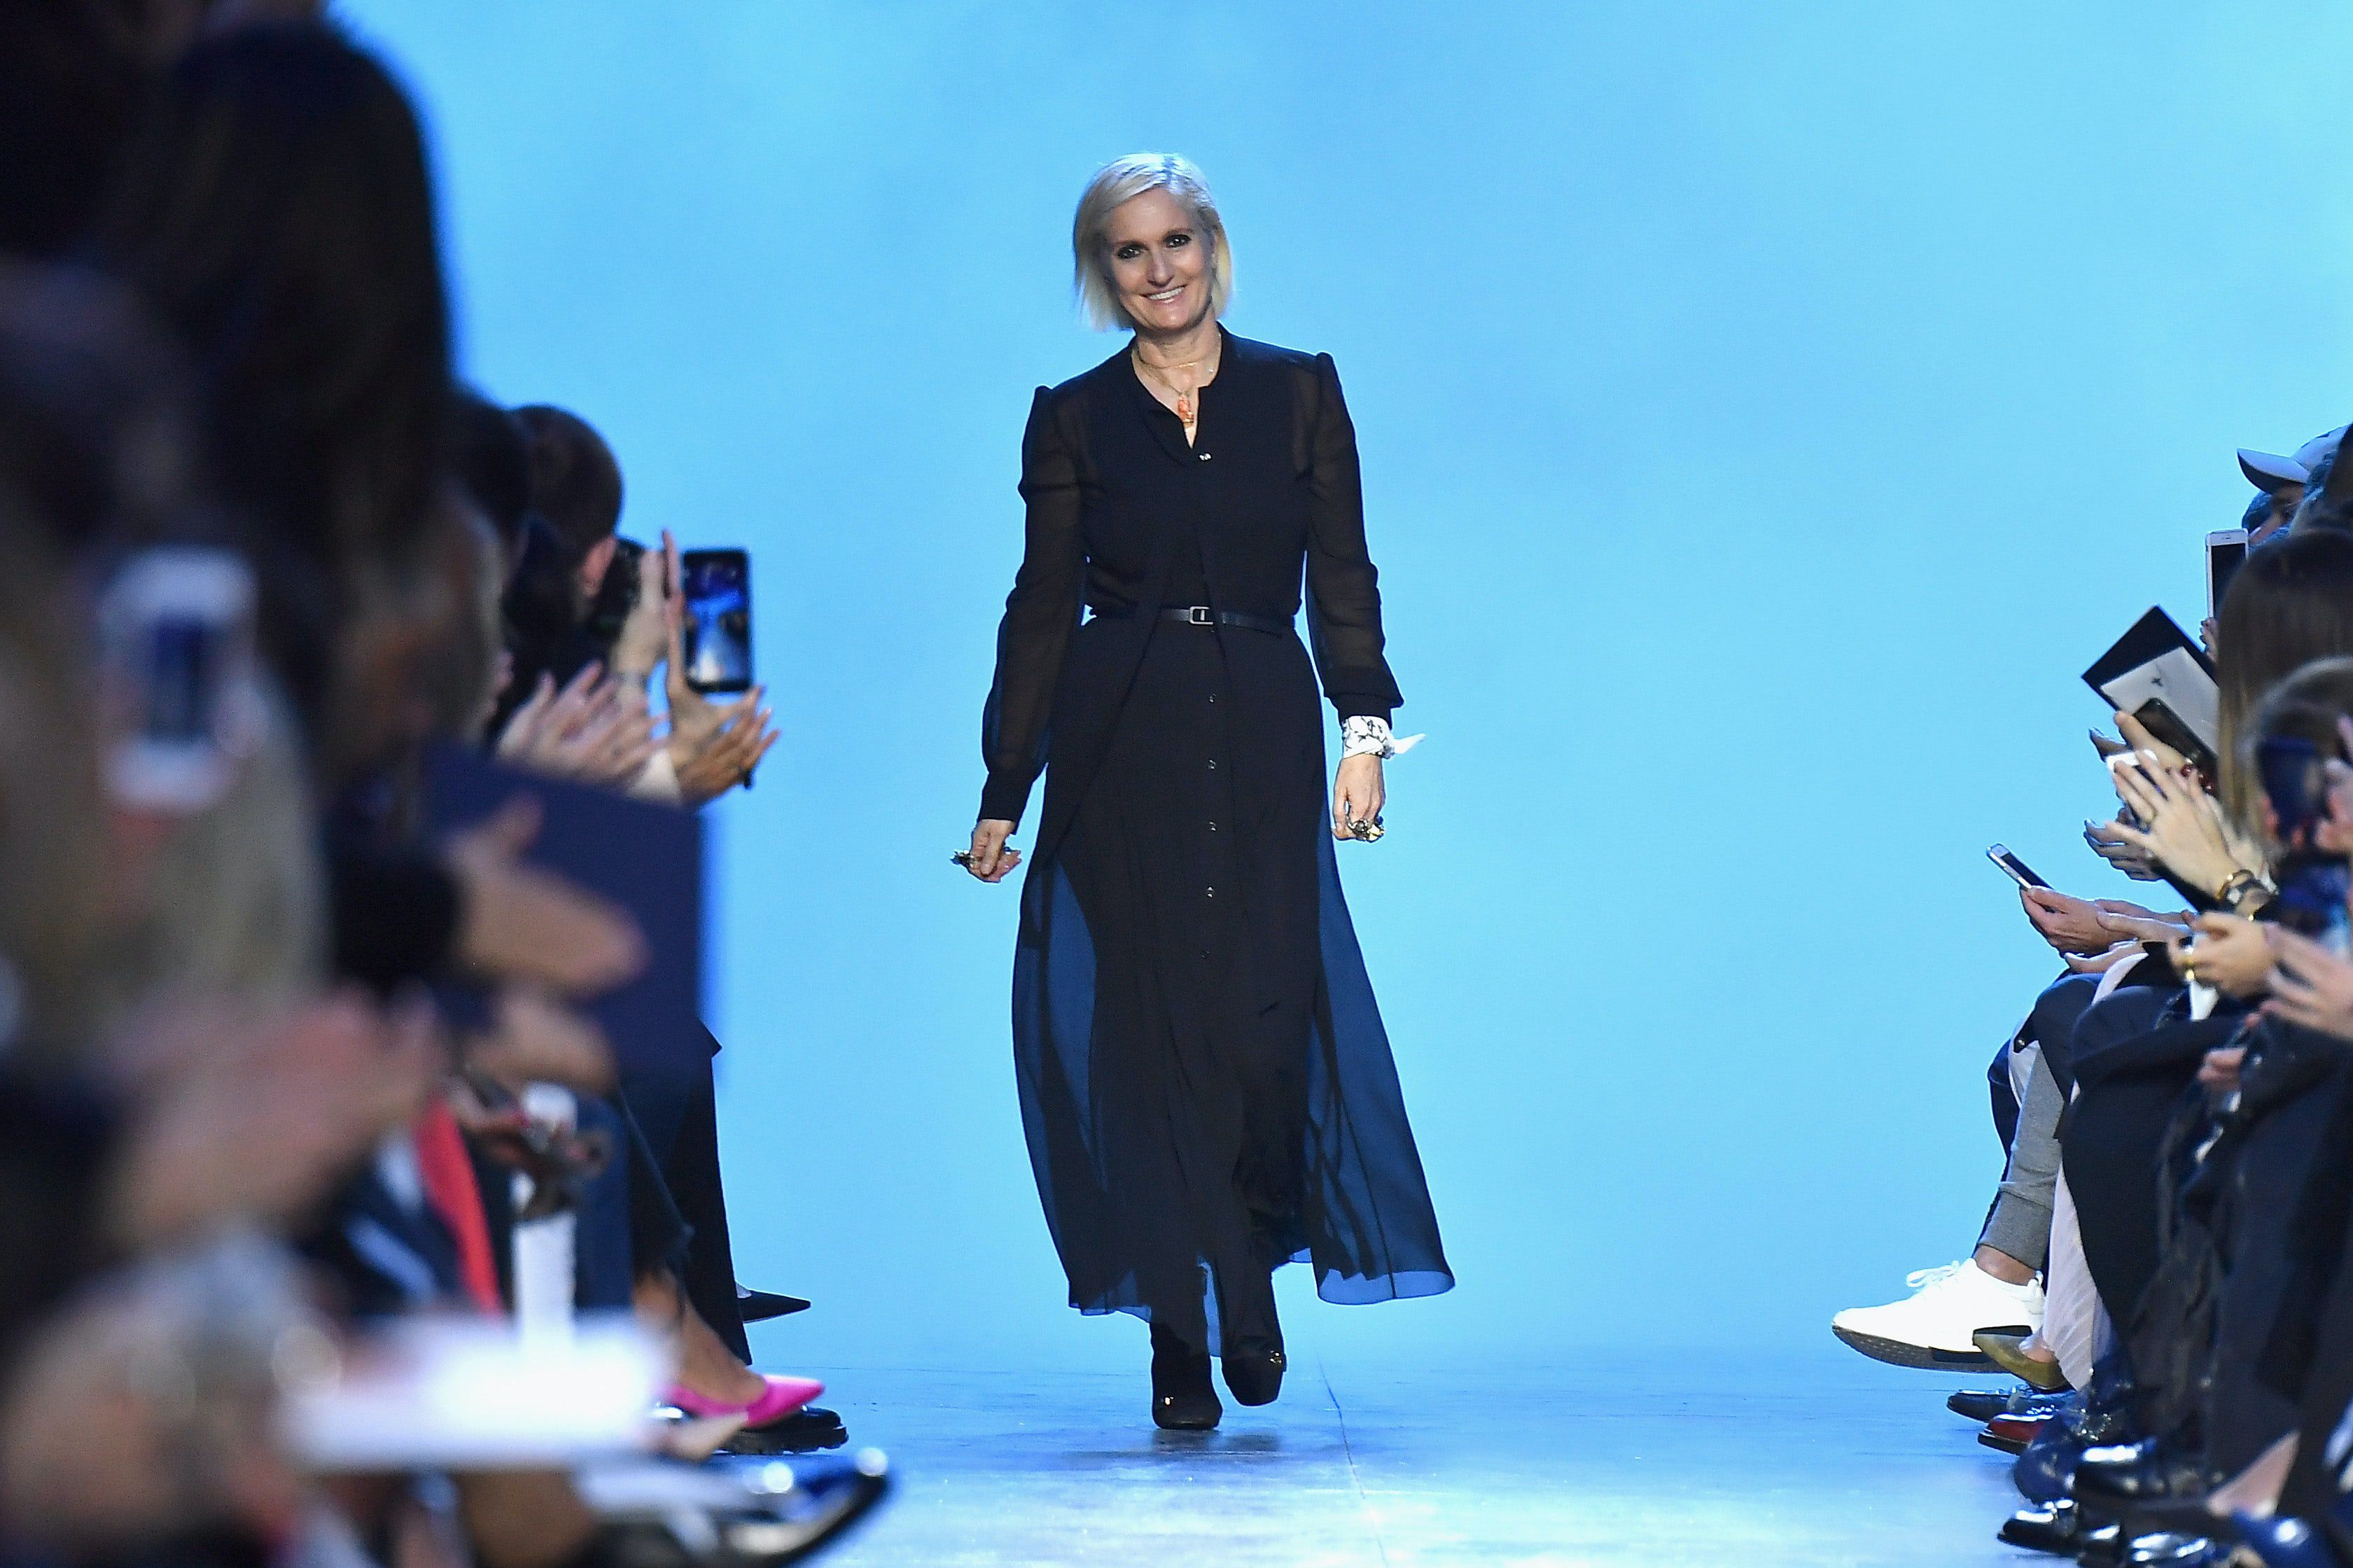 The Family Expands: LVMH Buys Christian Dior Couture for €12bn